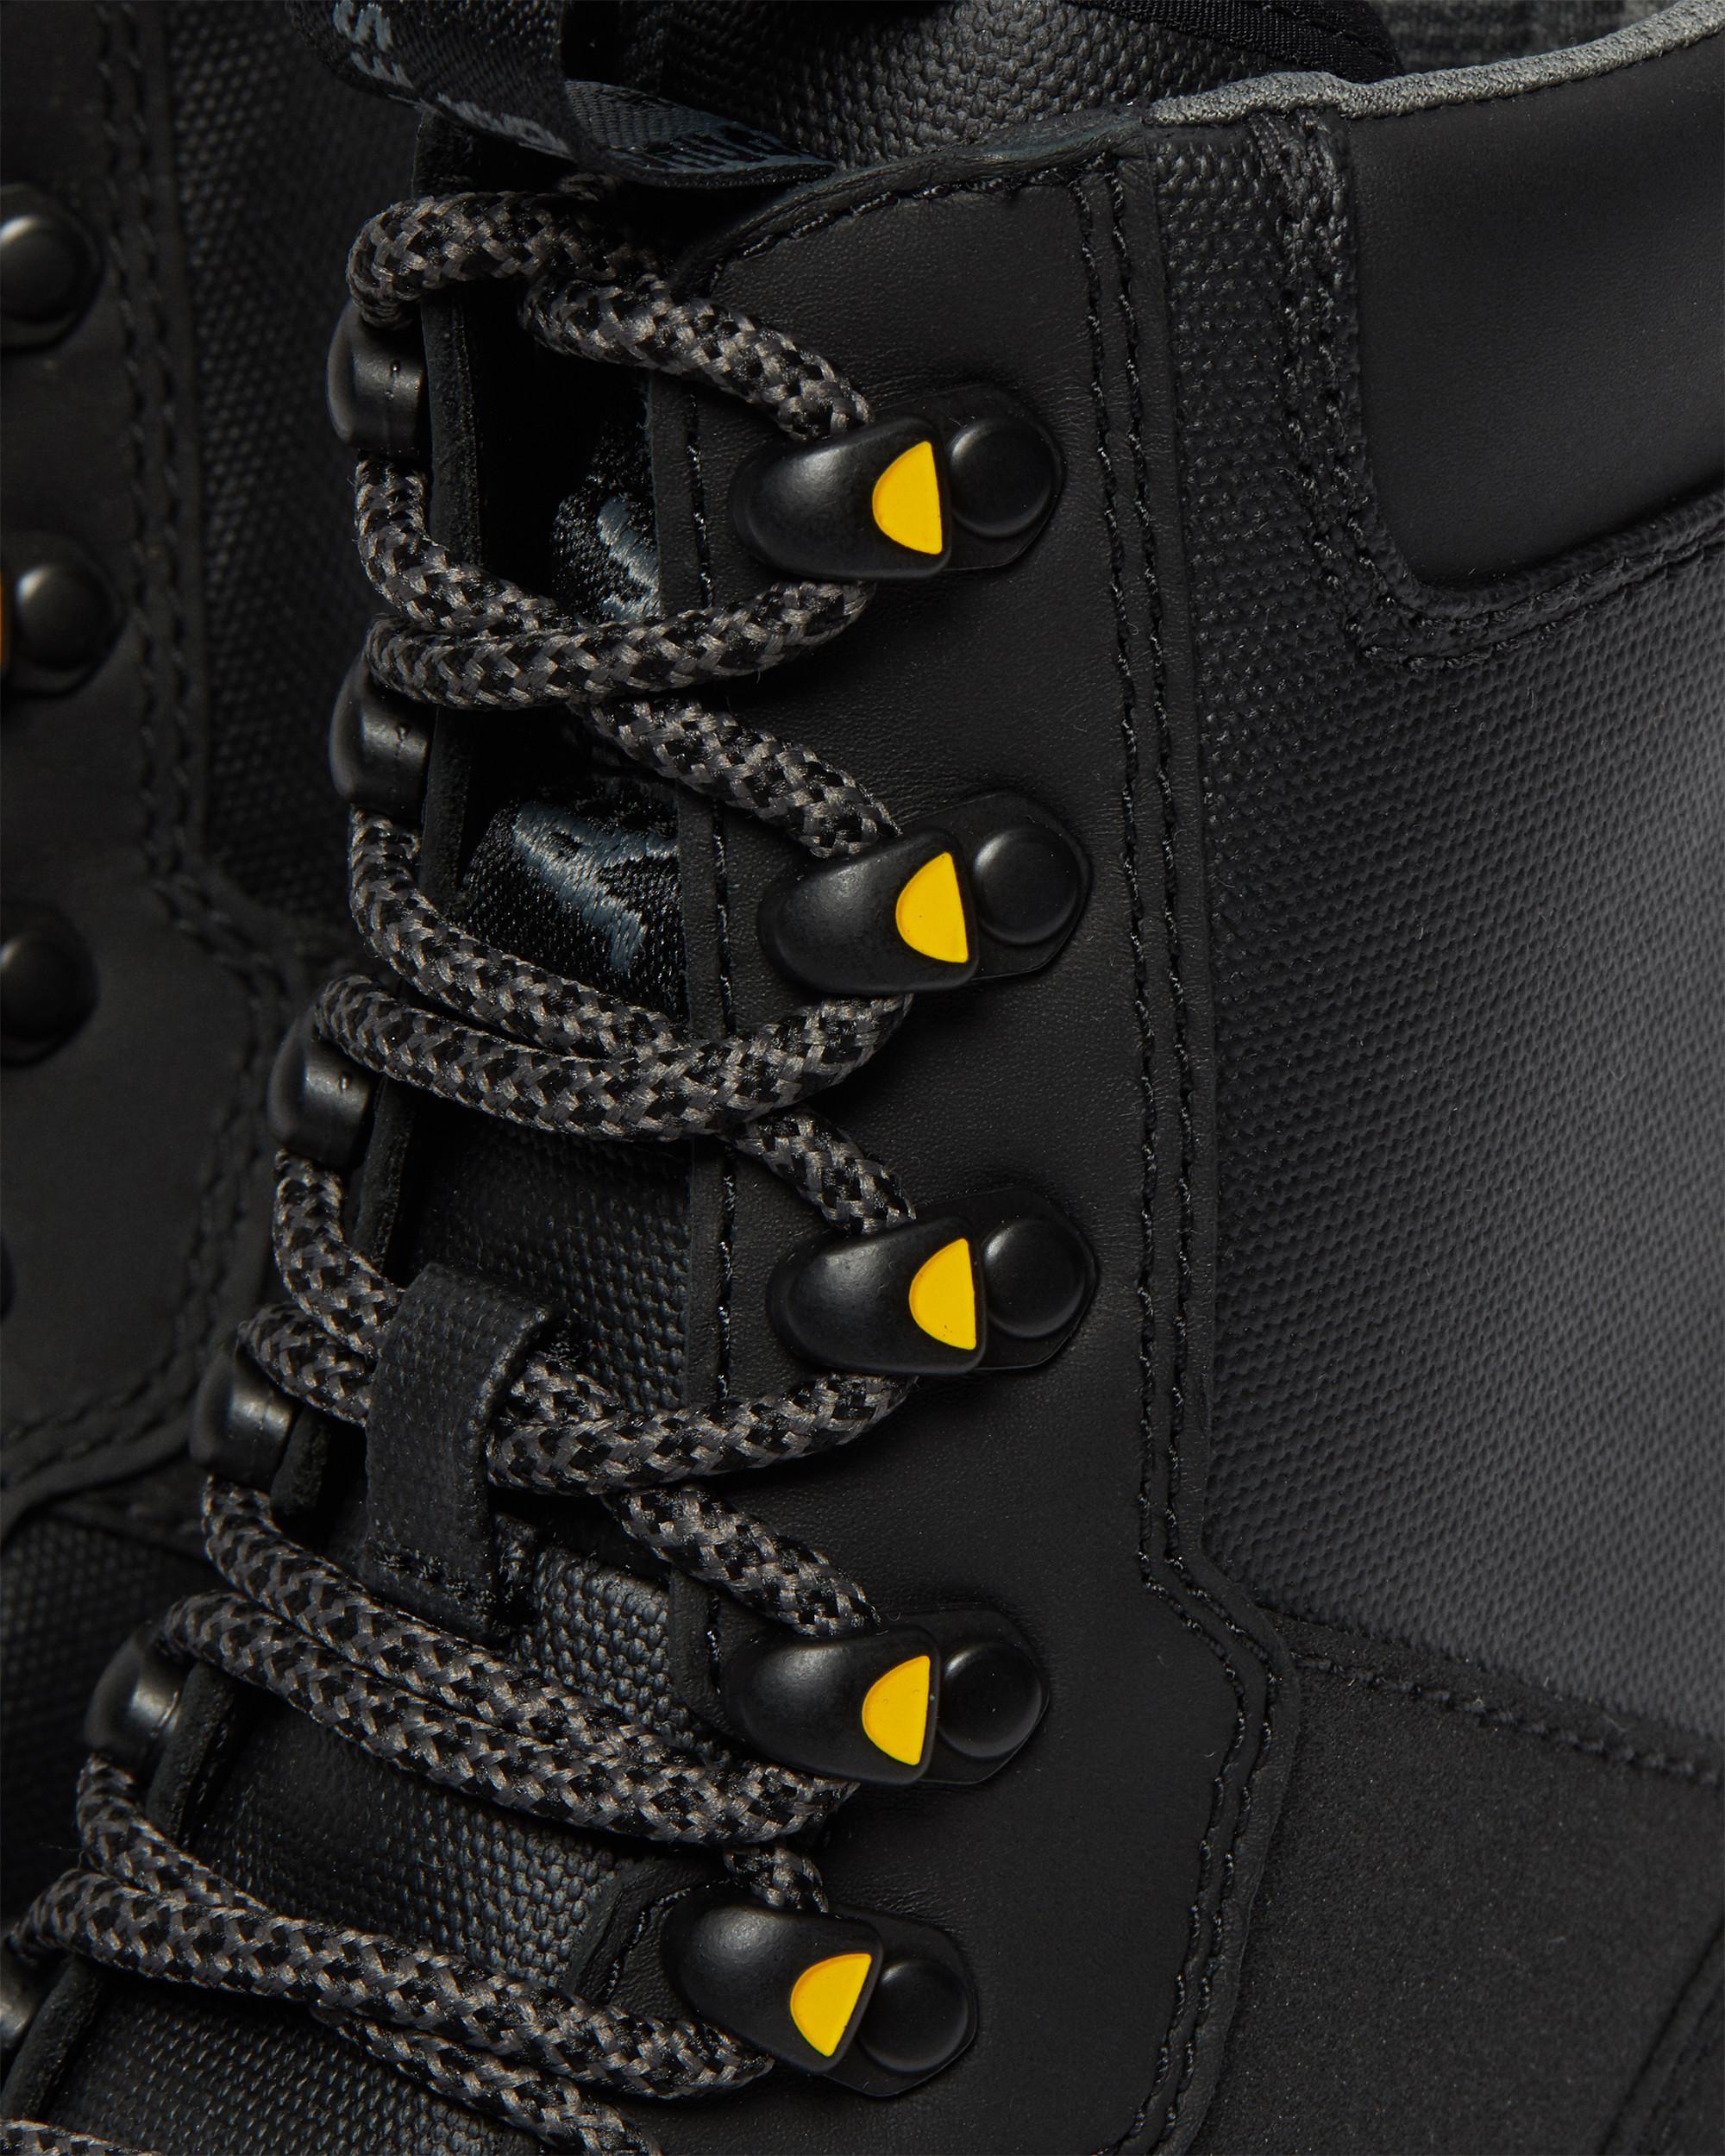 Iowa Coated Canvas Mix Utility Boots in Black | Dr. Martens